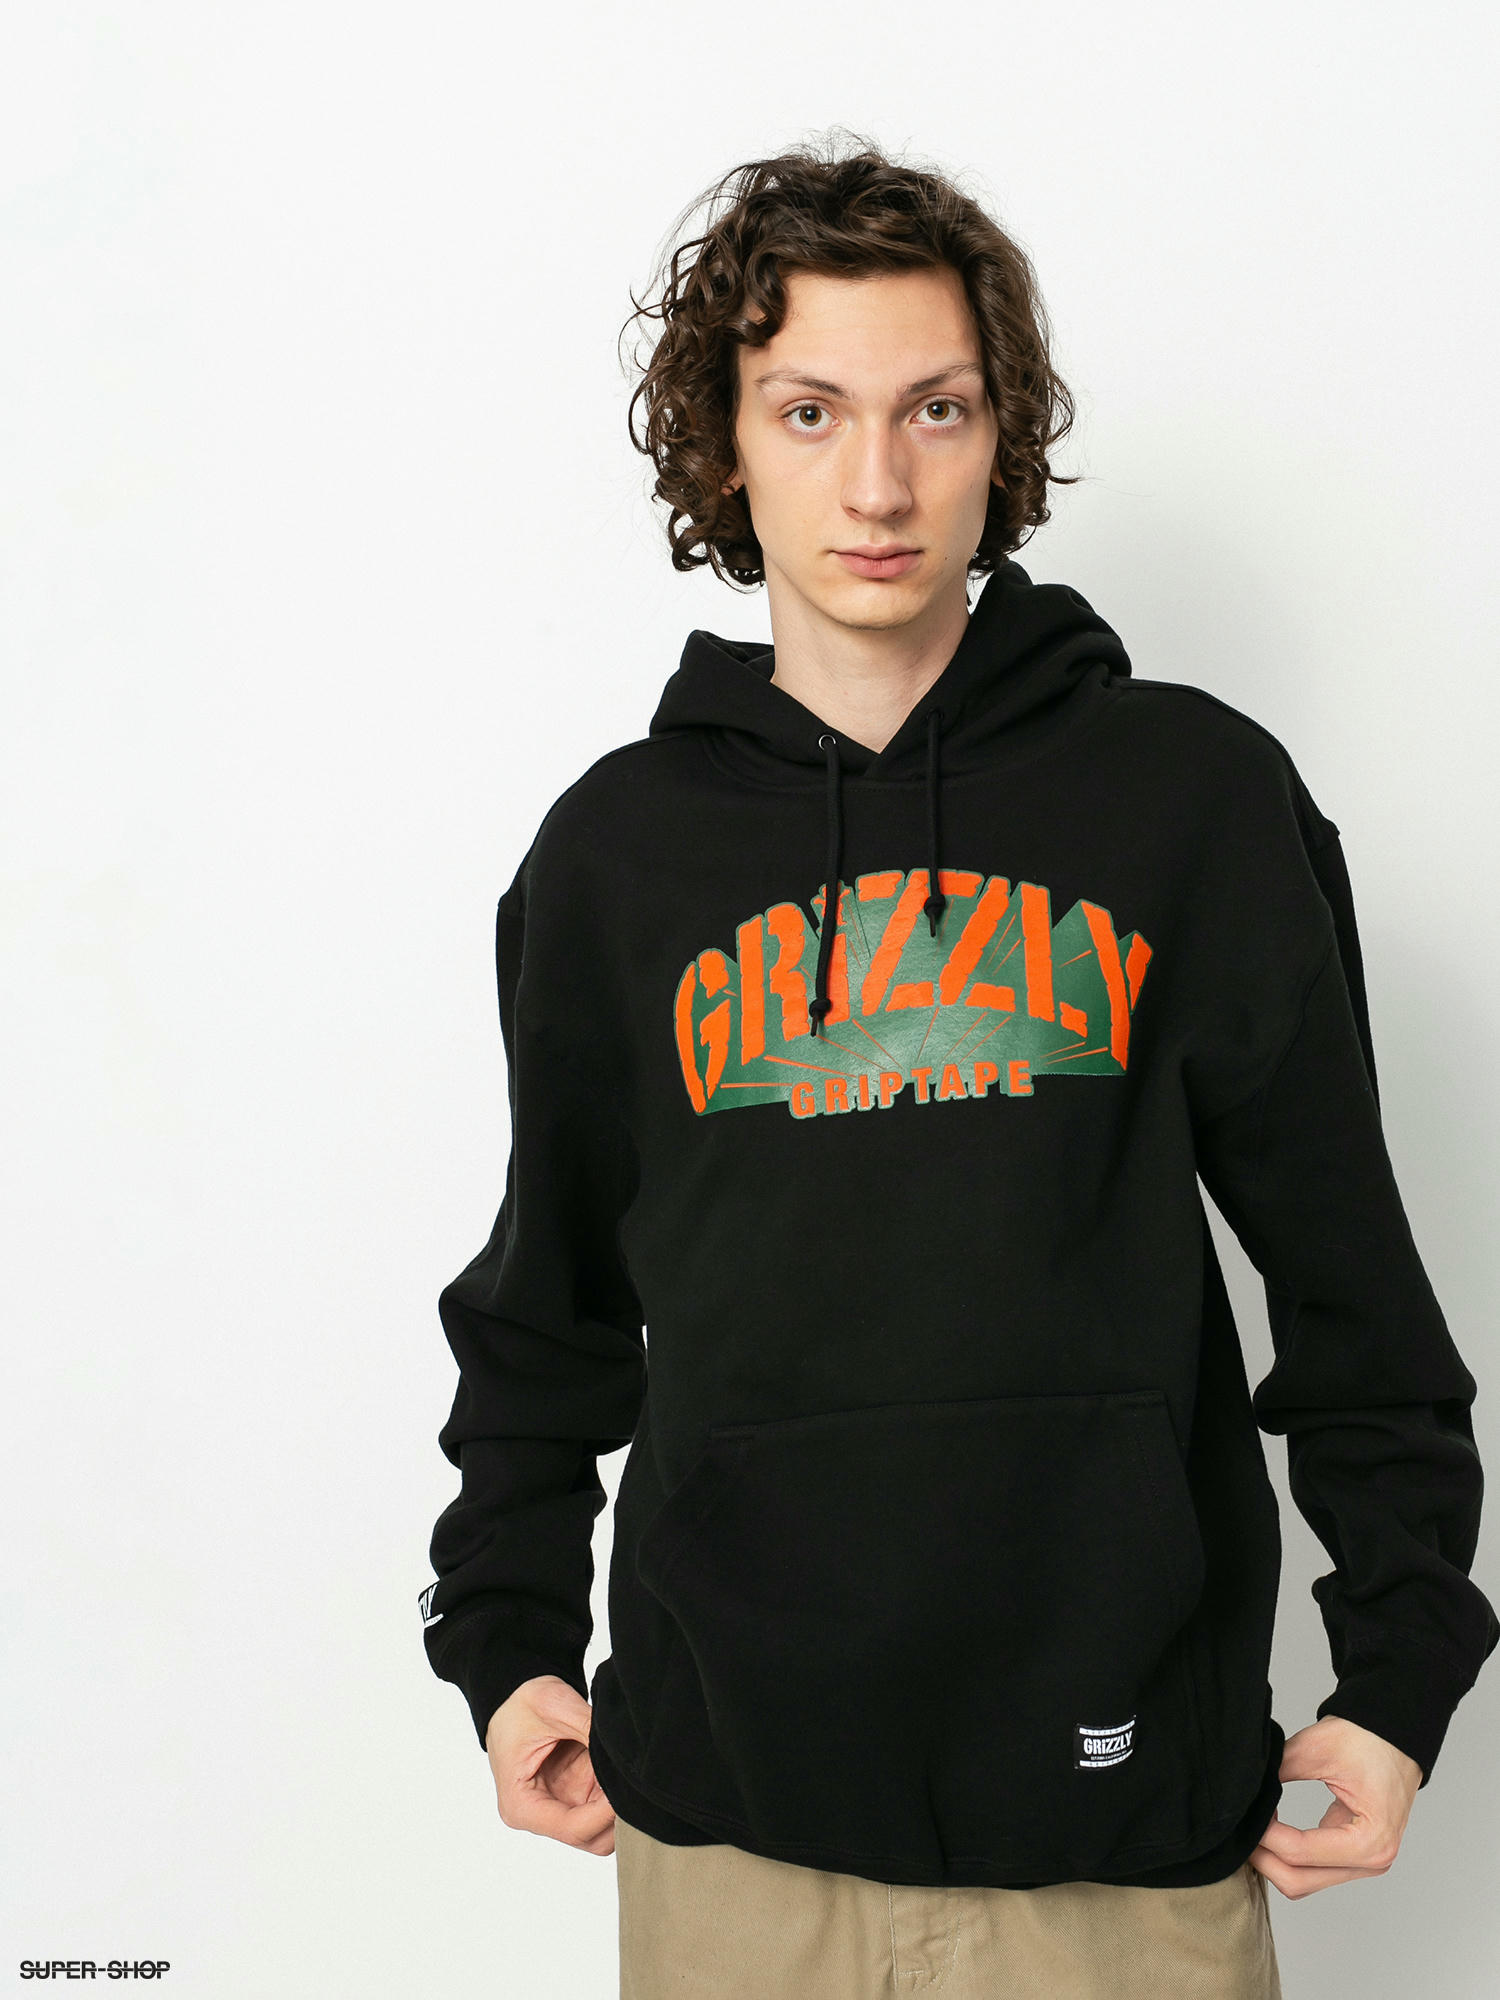 Grizzly Griptape Men's Stamp Scenic Bear Pullover Hoodie Black Hooded Top NWT 